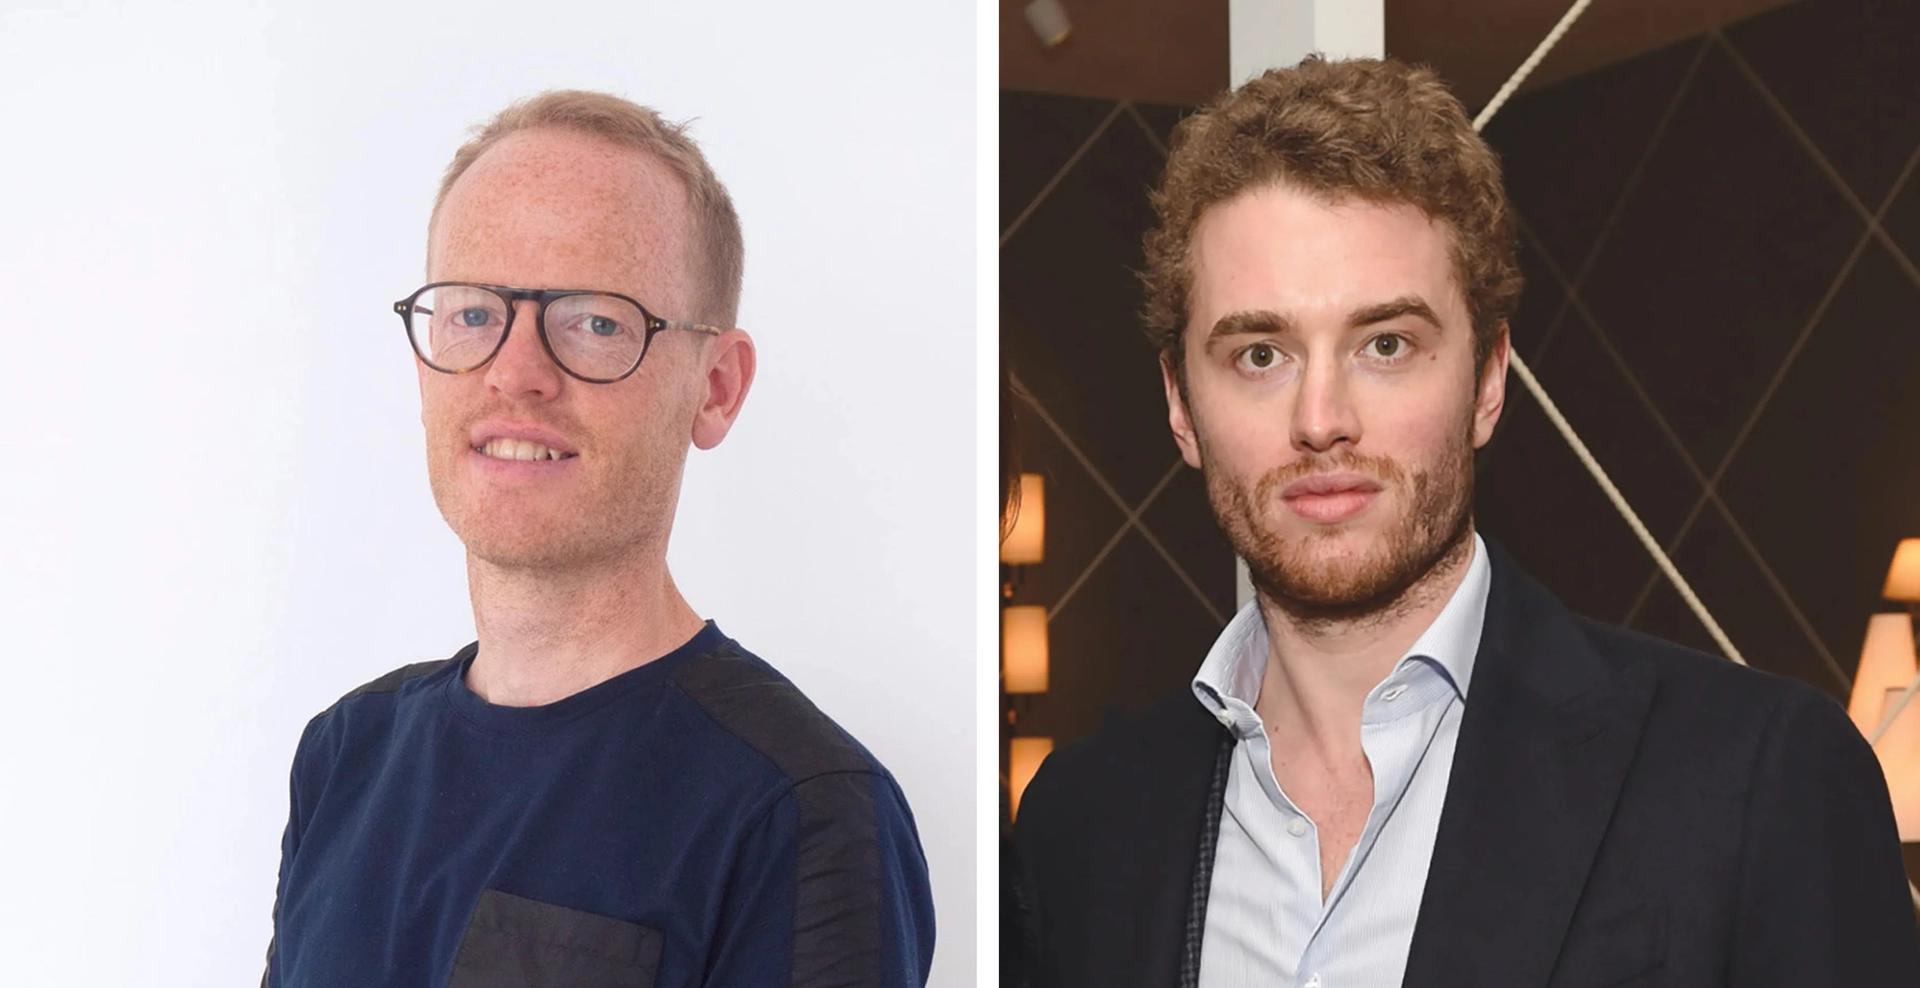 Robert Newland (left) worked as a director of Modern Collections, the company owned by Inigo Philbrick (right) from 2014-16 Newland: courtesy of Superblue; Philbrick: Stuart C. Wilson/Getty